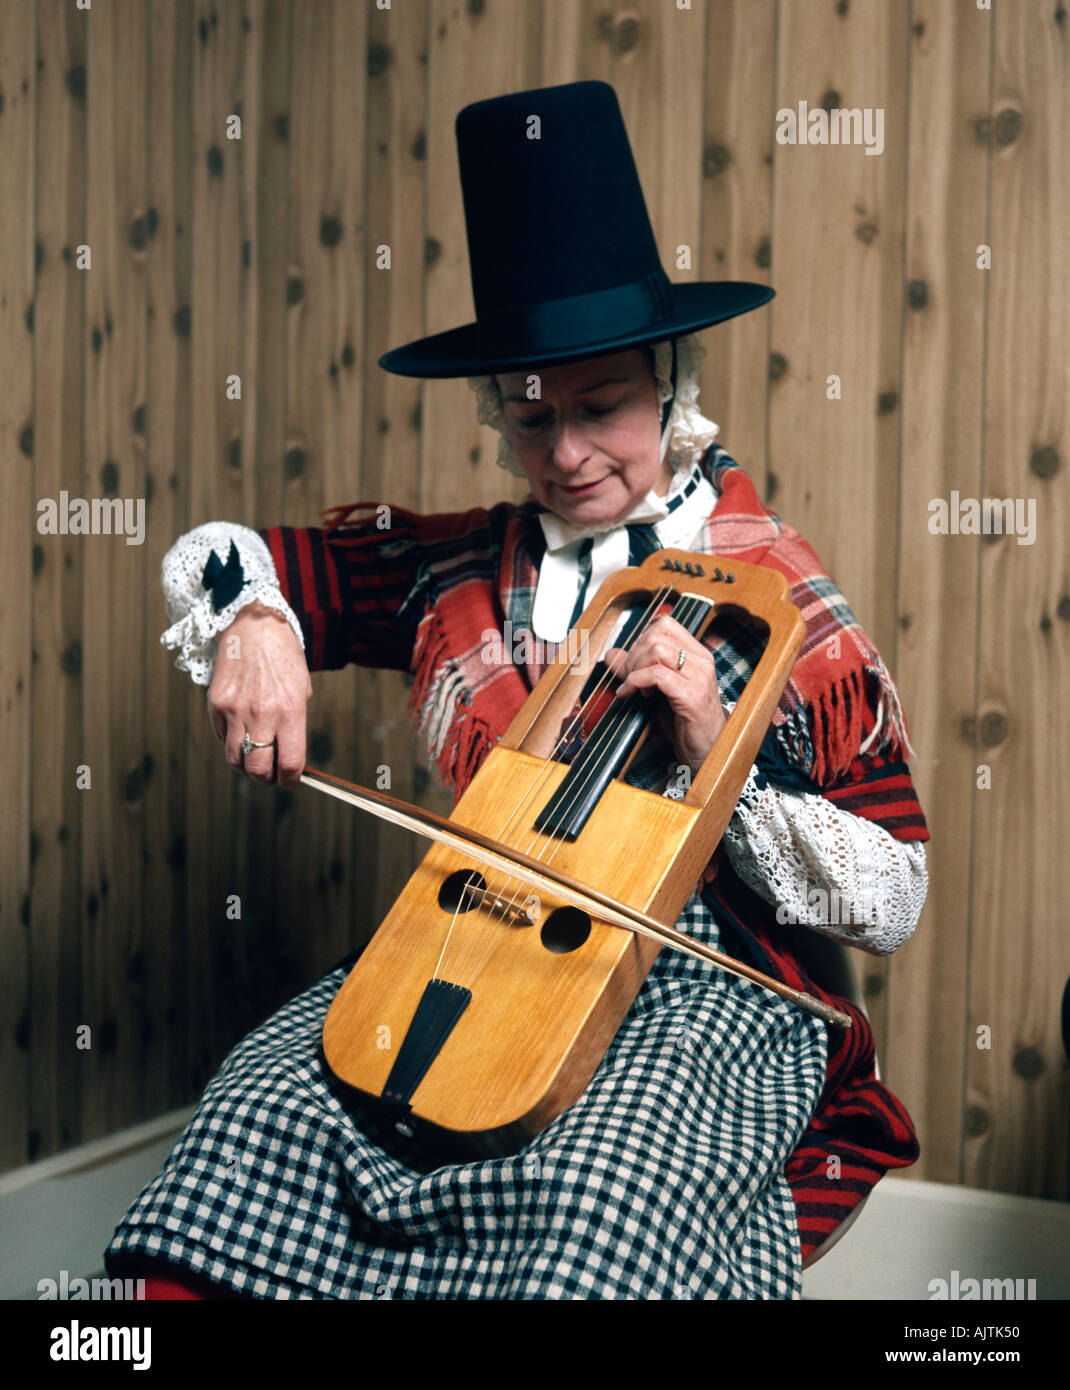 A Crwth an ancient Welsh stringed musical instrument played by a musician in traditional Welsh dress Stock Photo